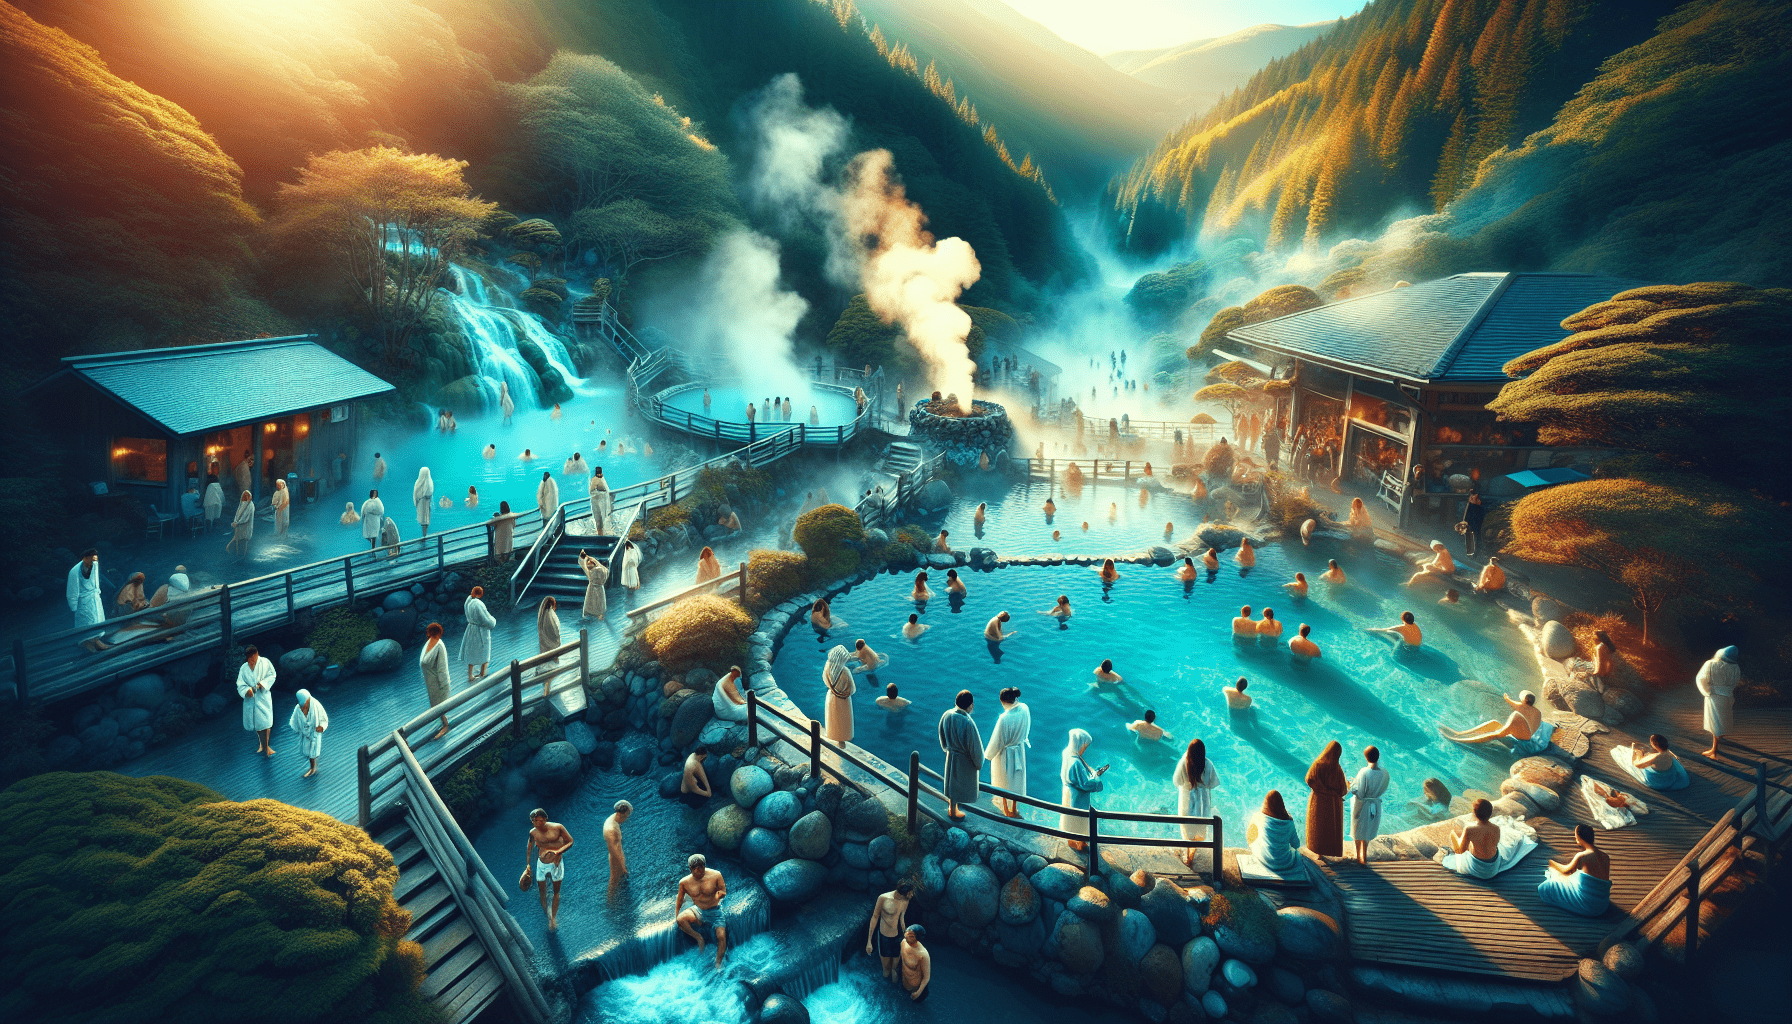 What Month Is Best To Go To Hot Springs?